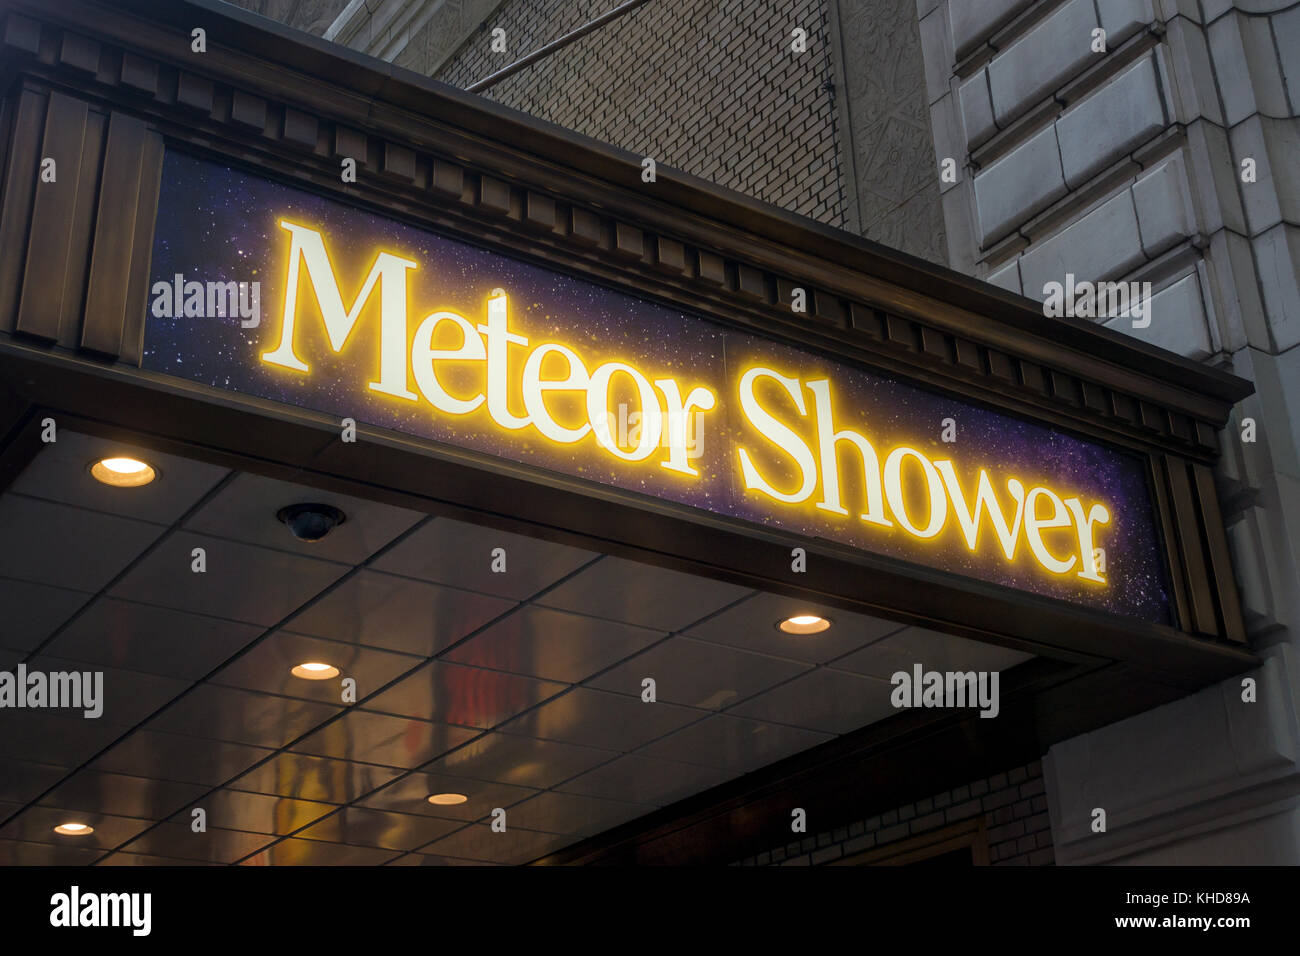 Meteor Shower, a comedy by Steve Martin staring Amy Schumer at the Booth Theatre in New York City Stock Photo